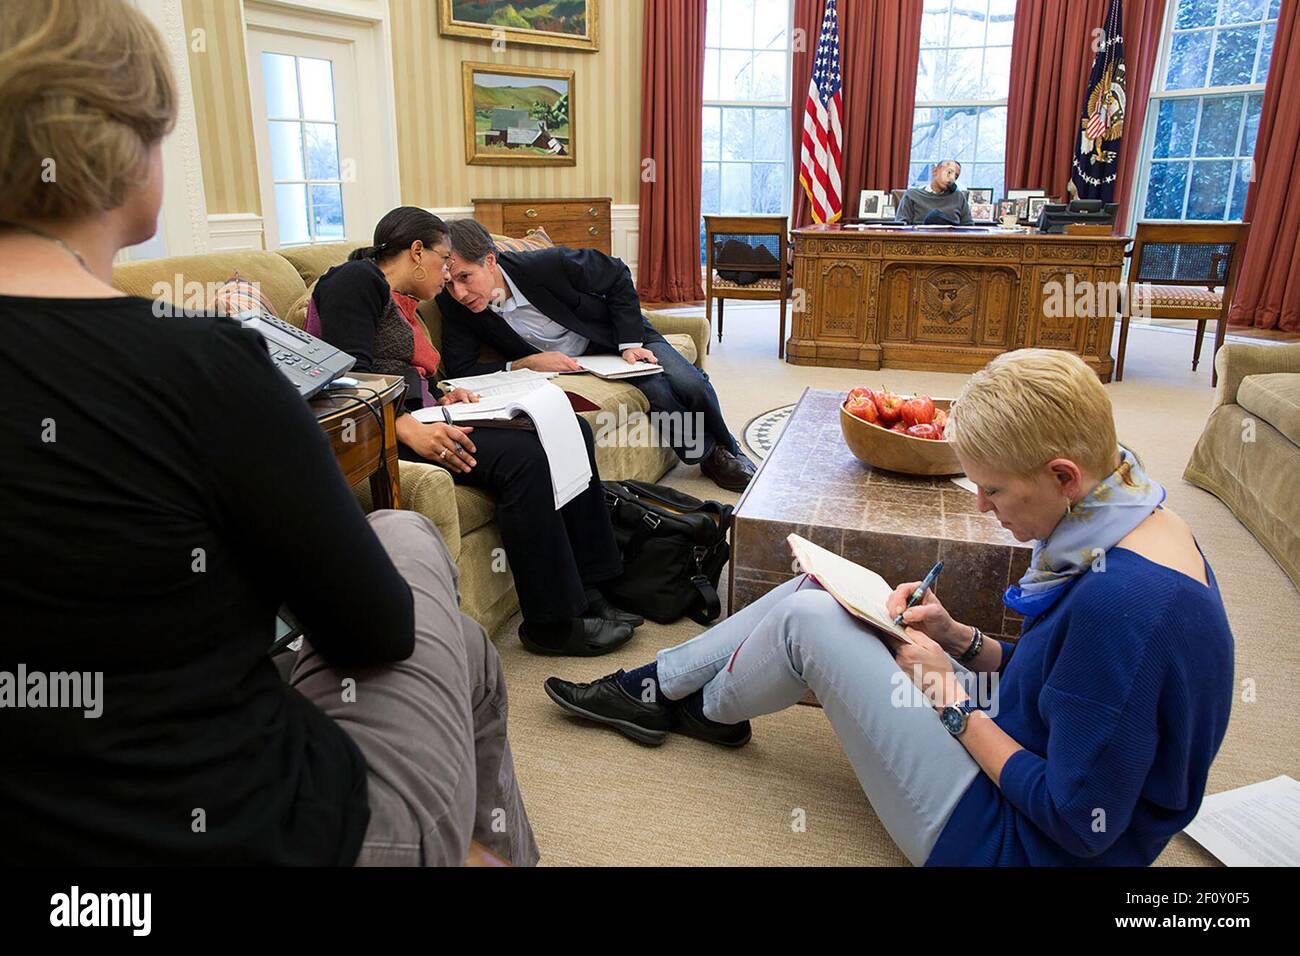 President Barack Obama talks on the phone with Russian President Vladimir  Putin while National Security Advisor Susan E. Rice confers with Tony  Blinken, Deputy National Security Advisor, in the Oval Office, Sunday,